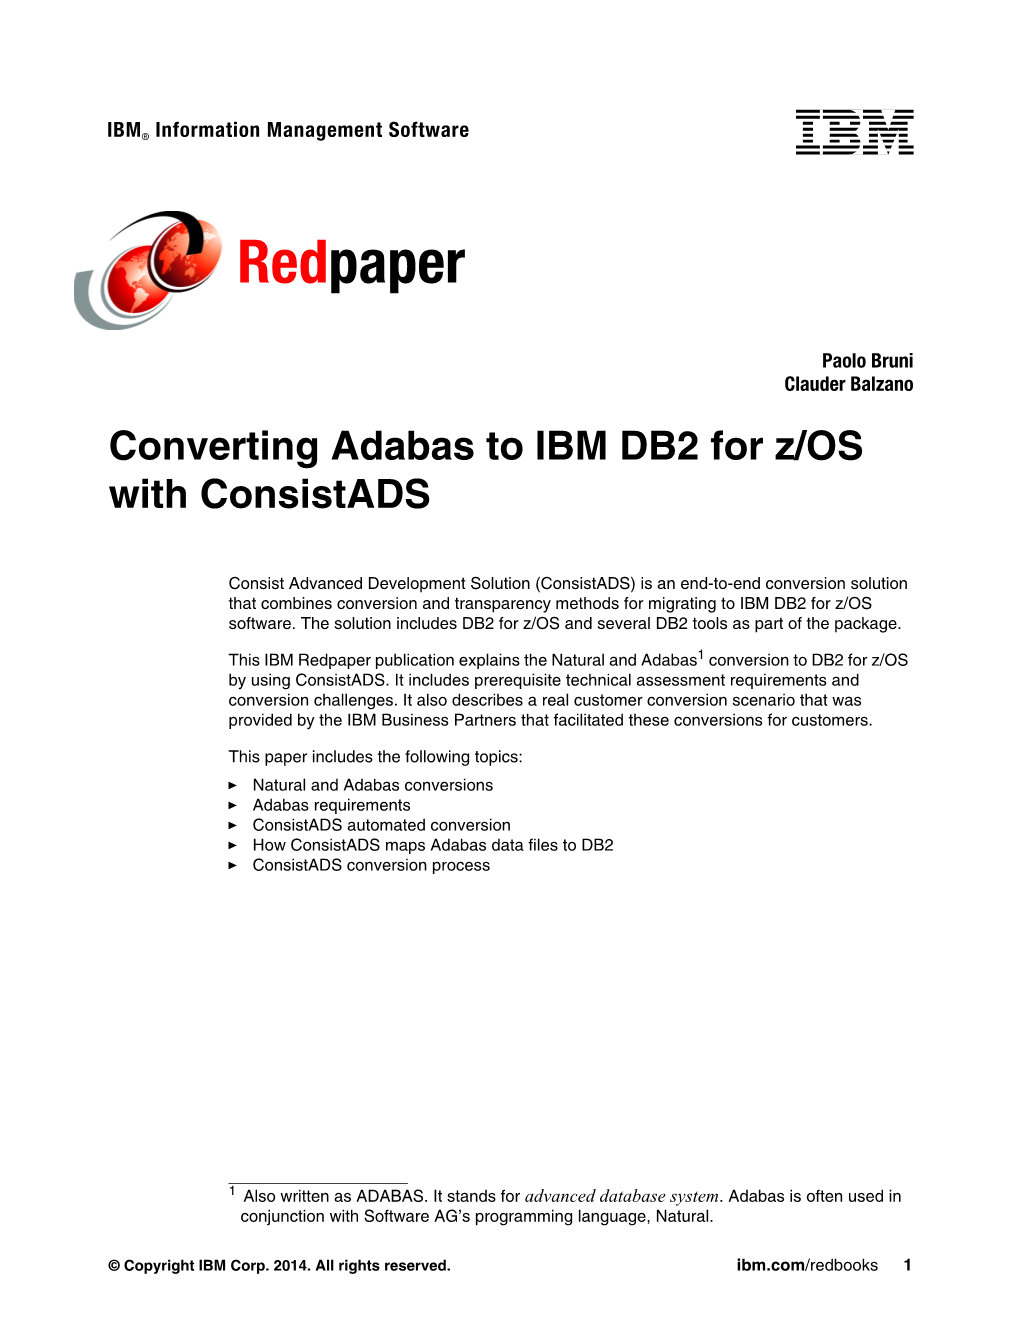 Converting Adabas to IBM DB2 for Z/OS with Consistads